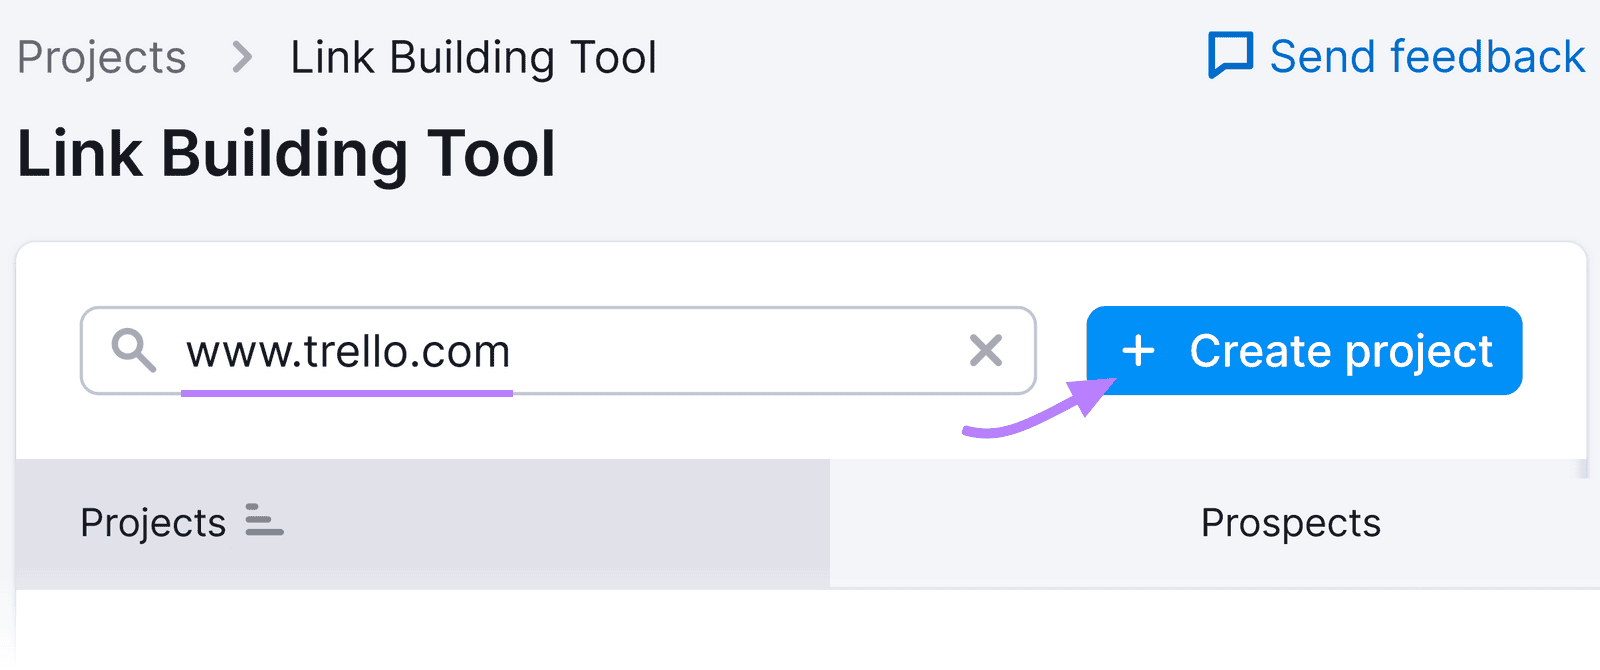 Link Building Tool UI with "www.trello.com" in the search bar and a "+ Create project" button, highlighted with purple arrow.